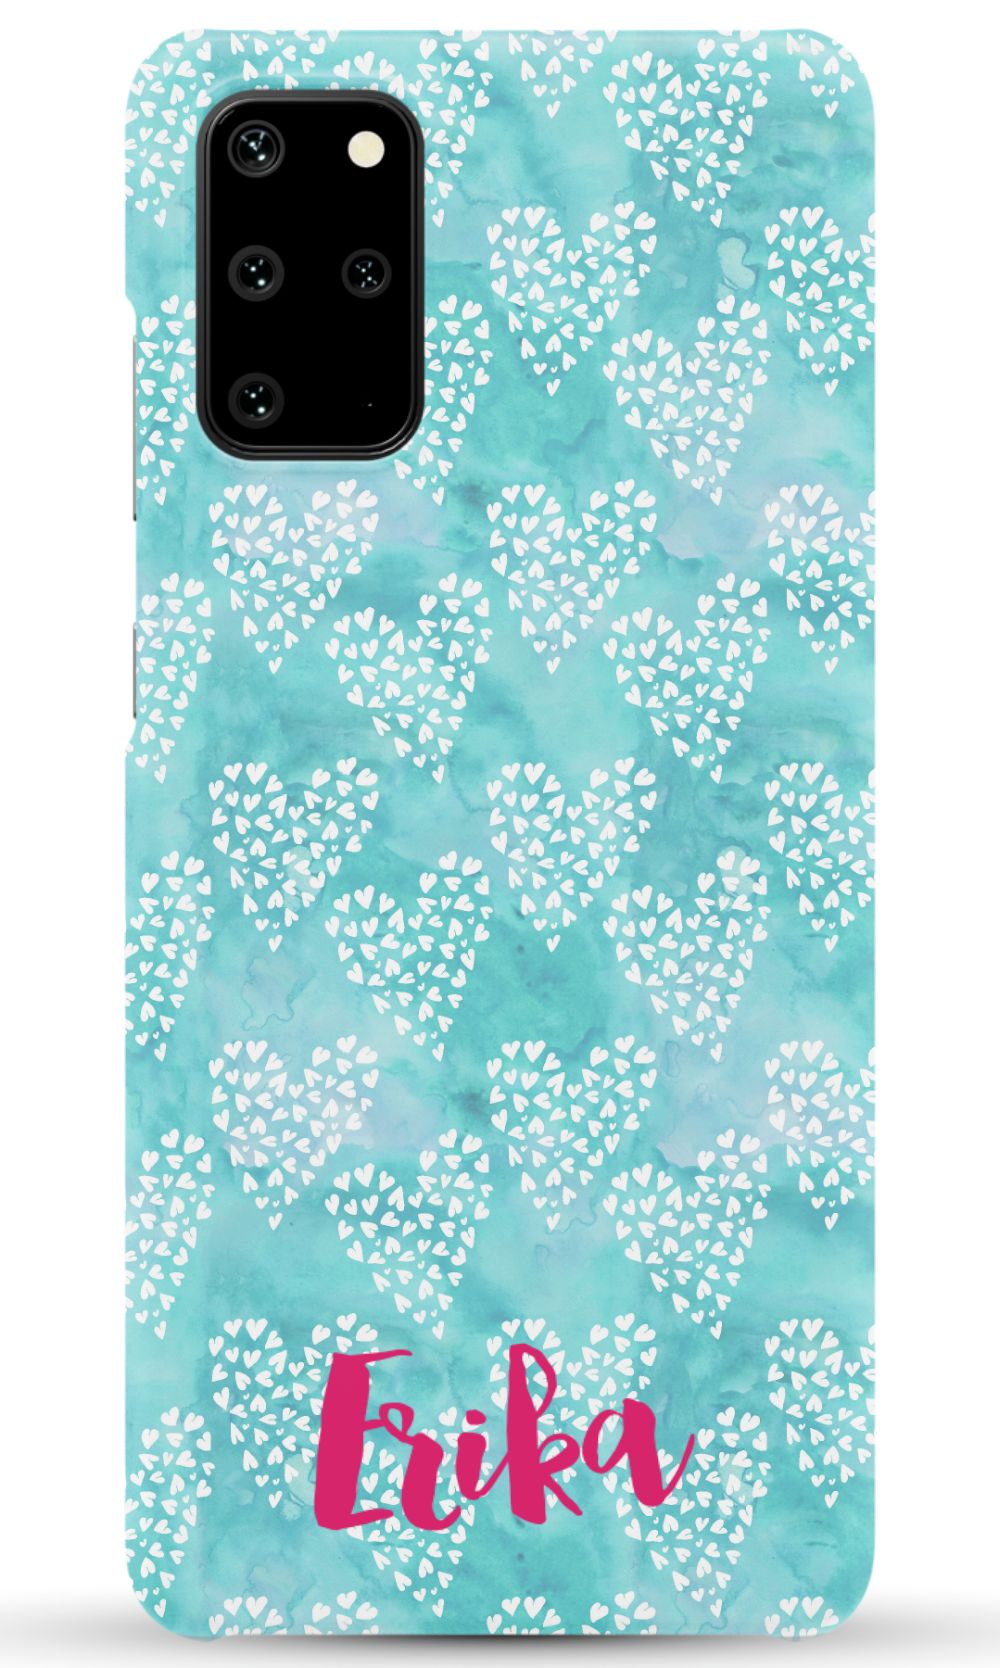 Personalized Hearts Phone Case